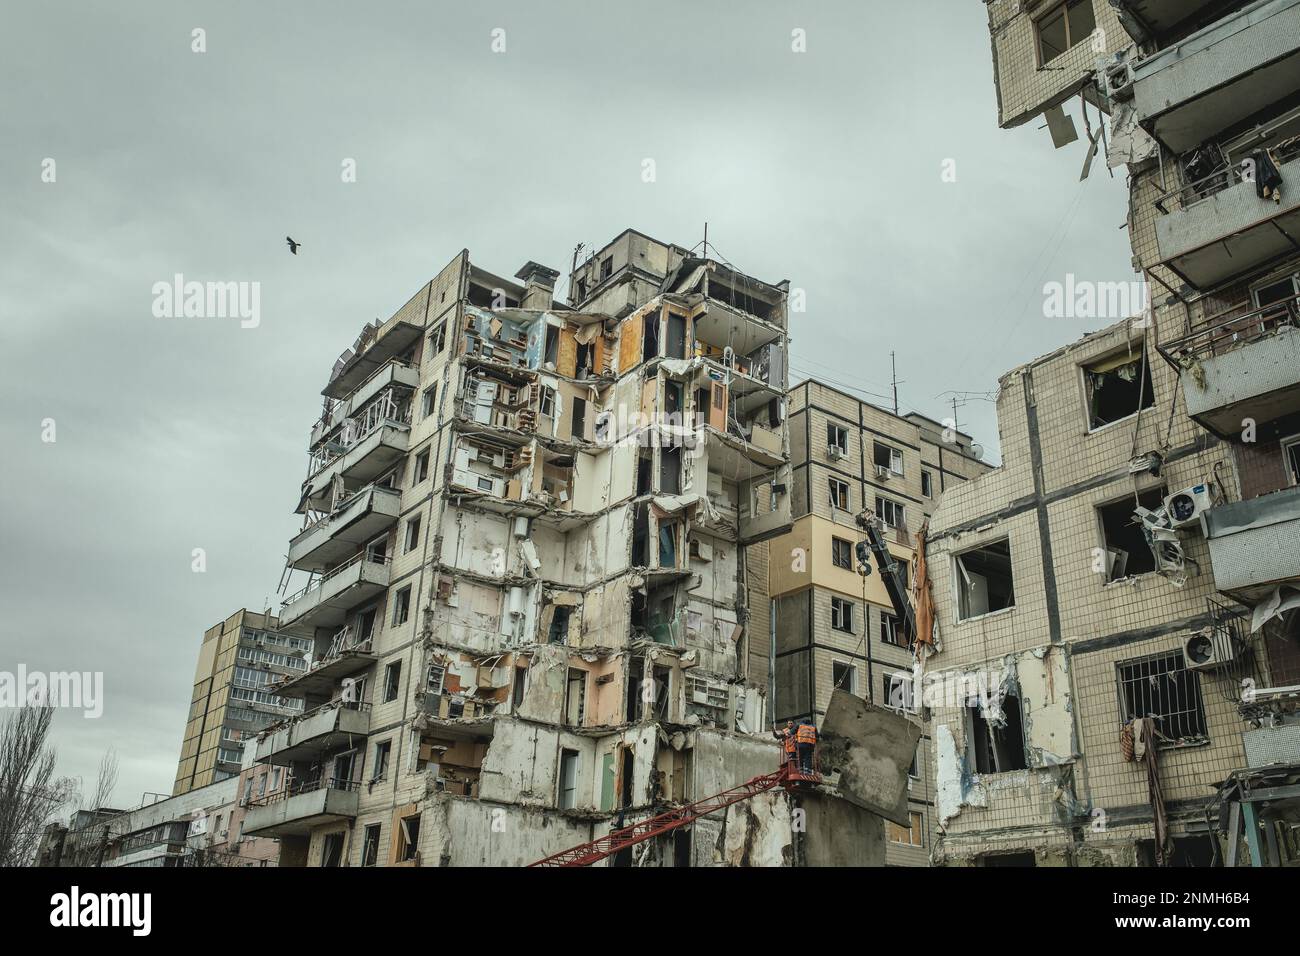 Destroyed apartment building in the major city of Dnipro, a Russian missile hit the building on 14.01.2023, 45 people were killed, Dnipro, Ukraine Stock Photo